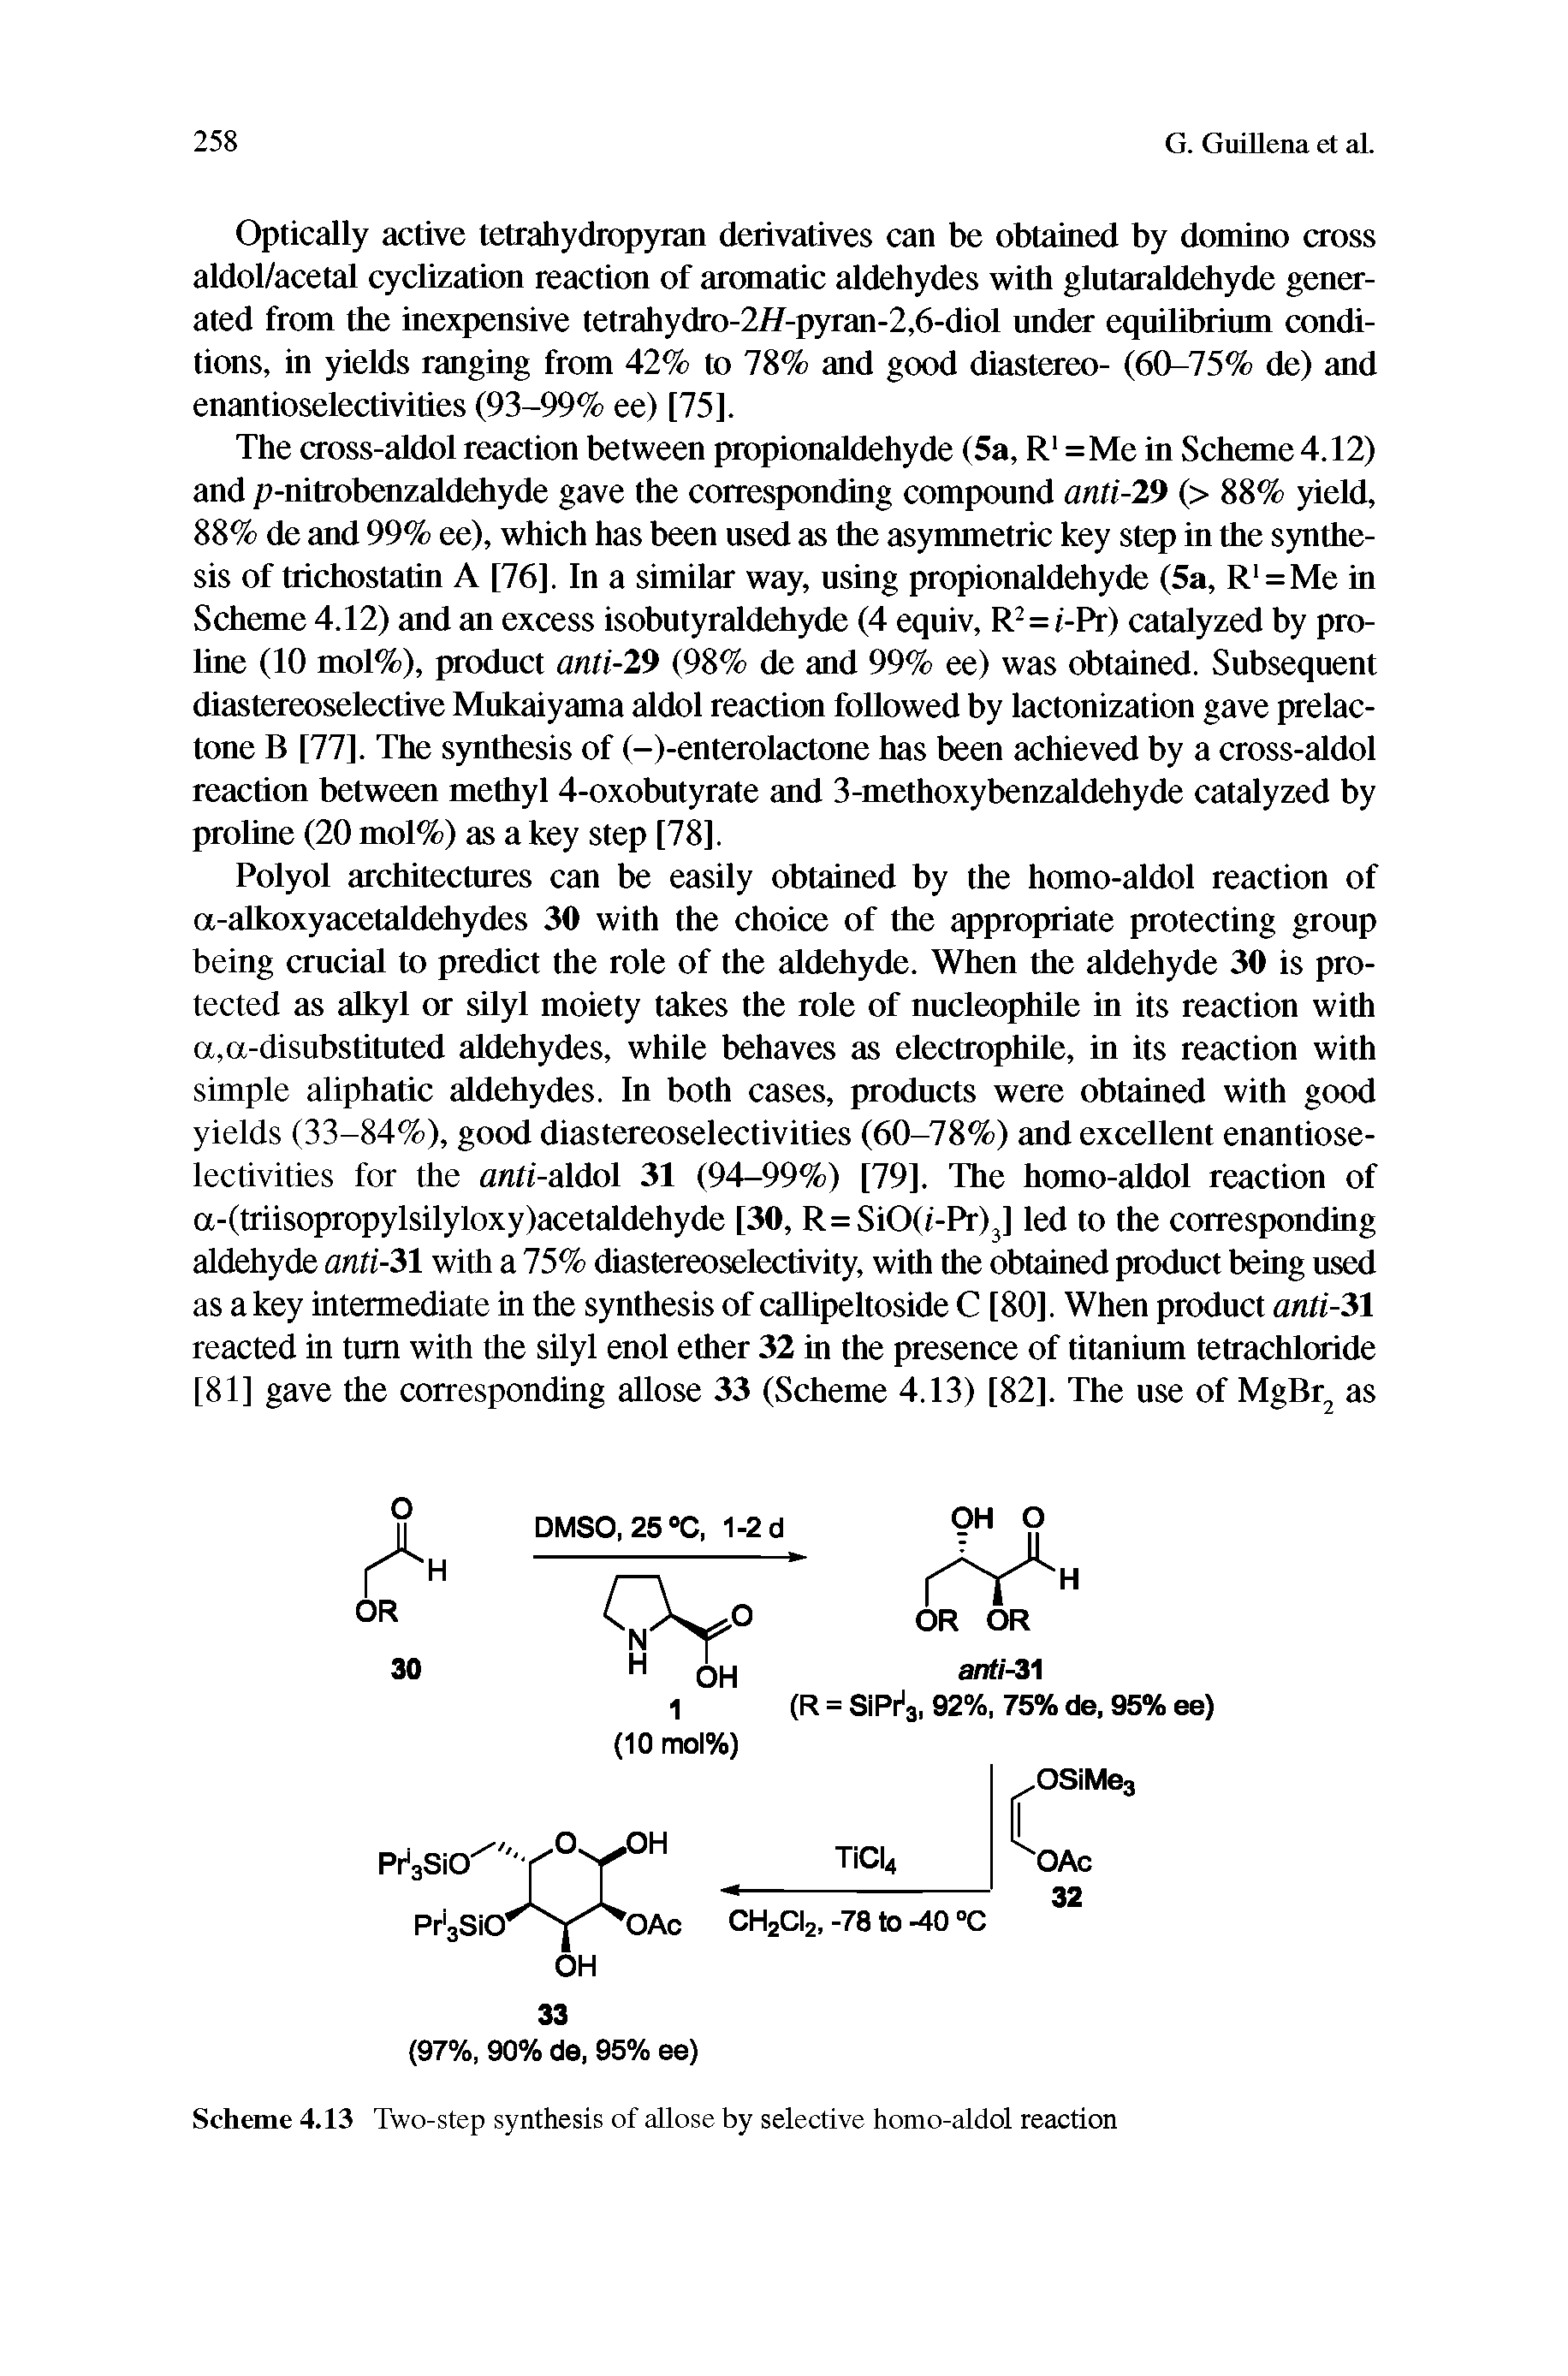 Scheme 4.13 Two-step synthesis of allose by selective homo-aldol reaction...